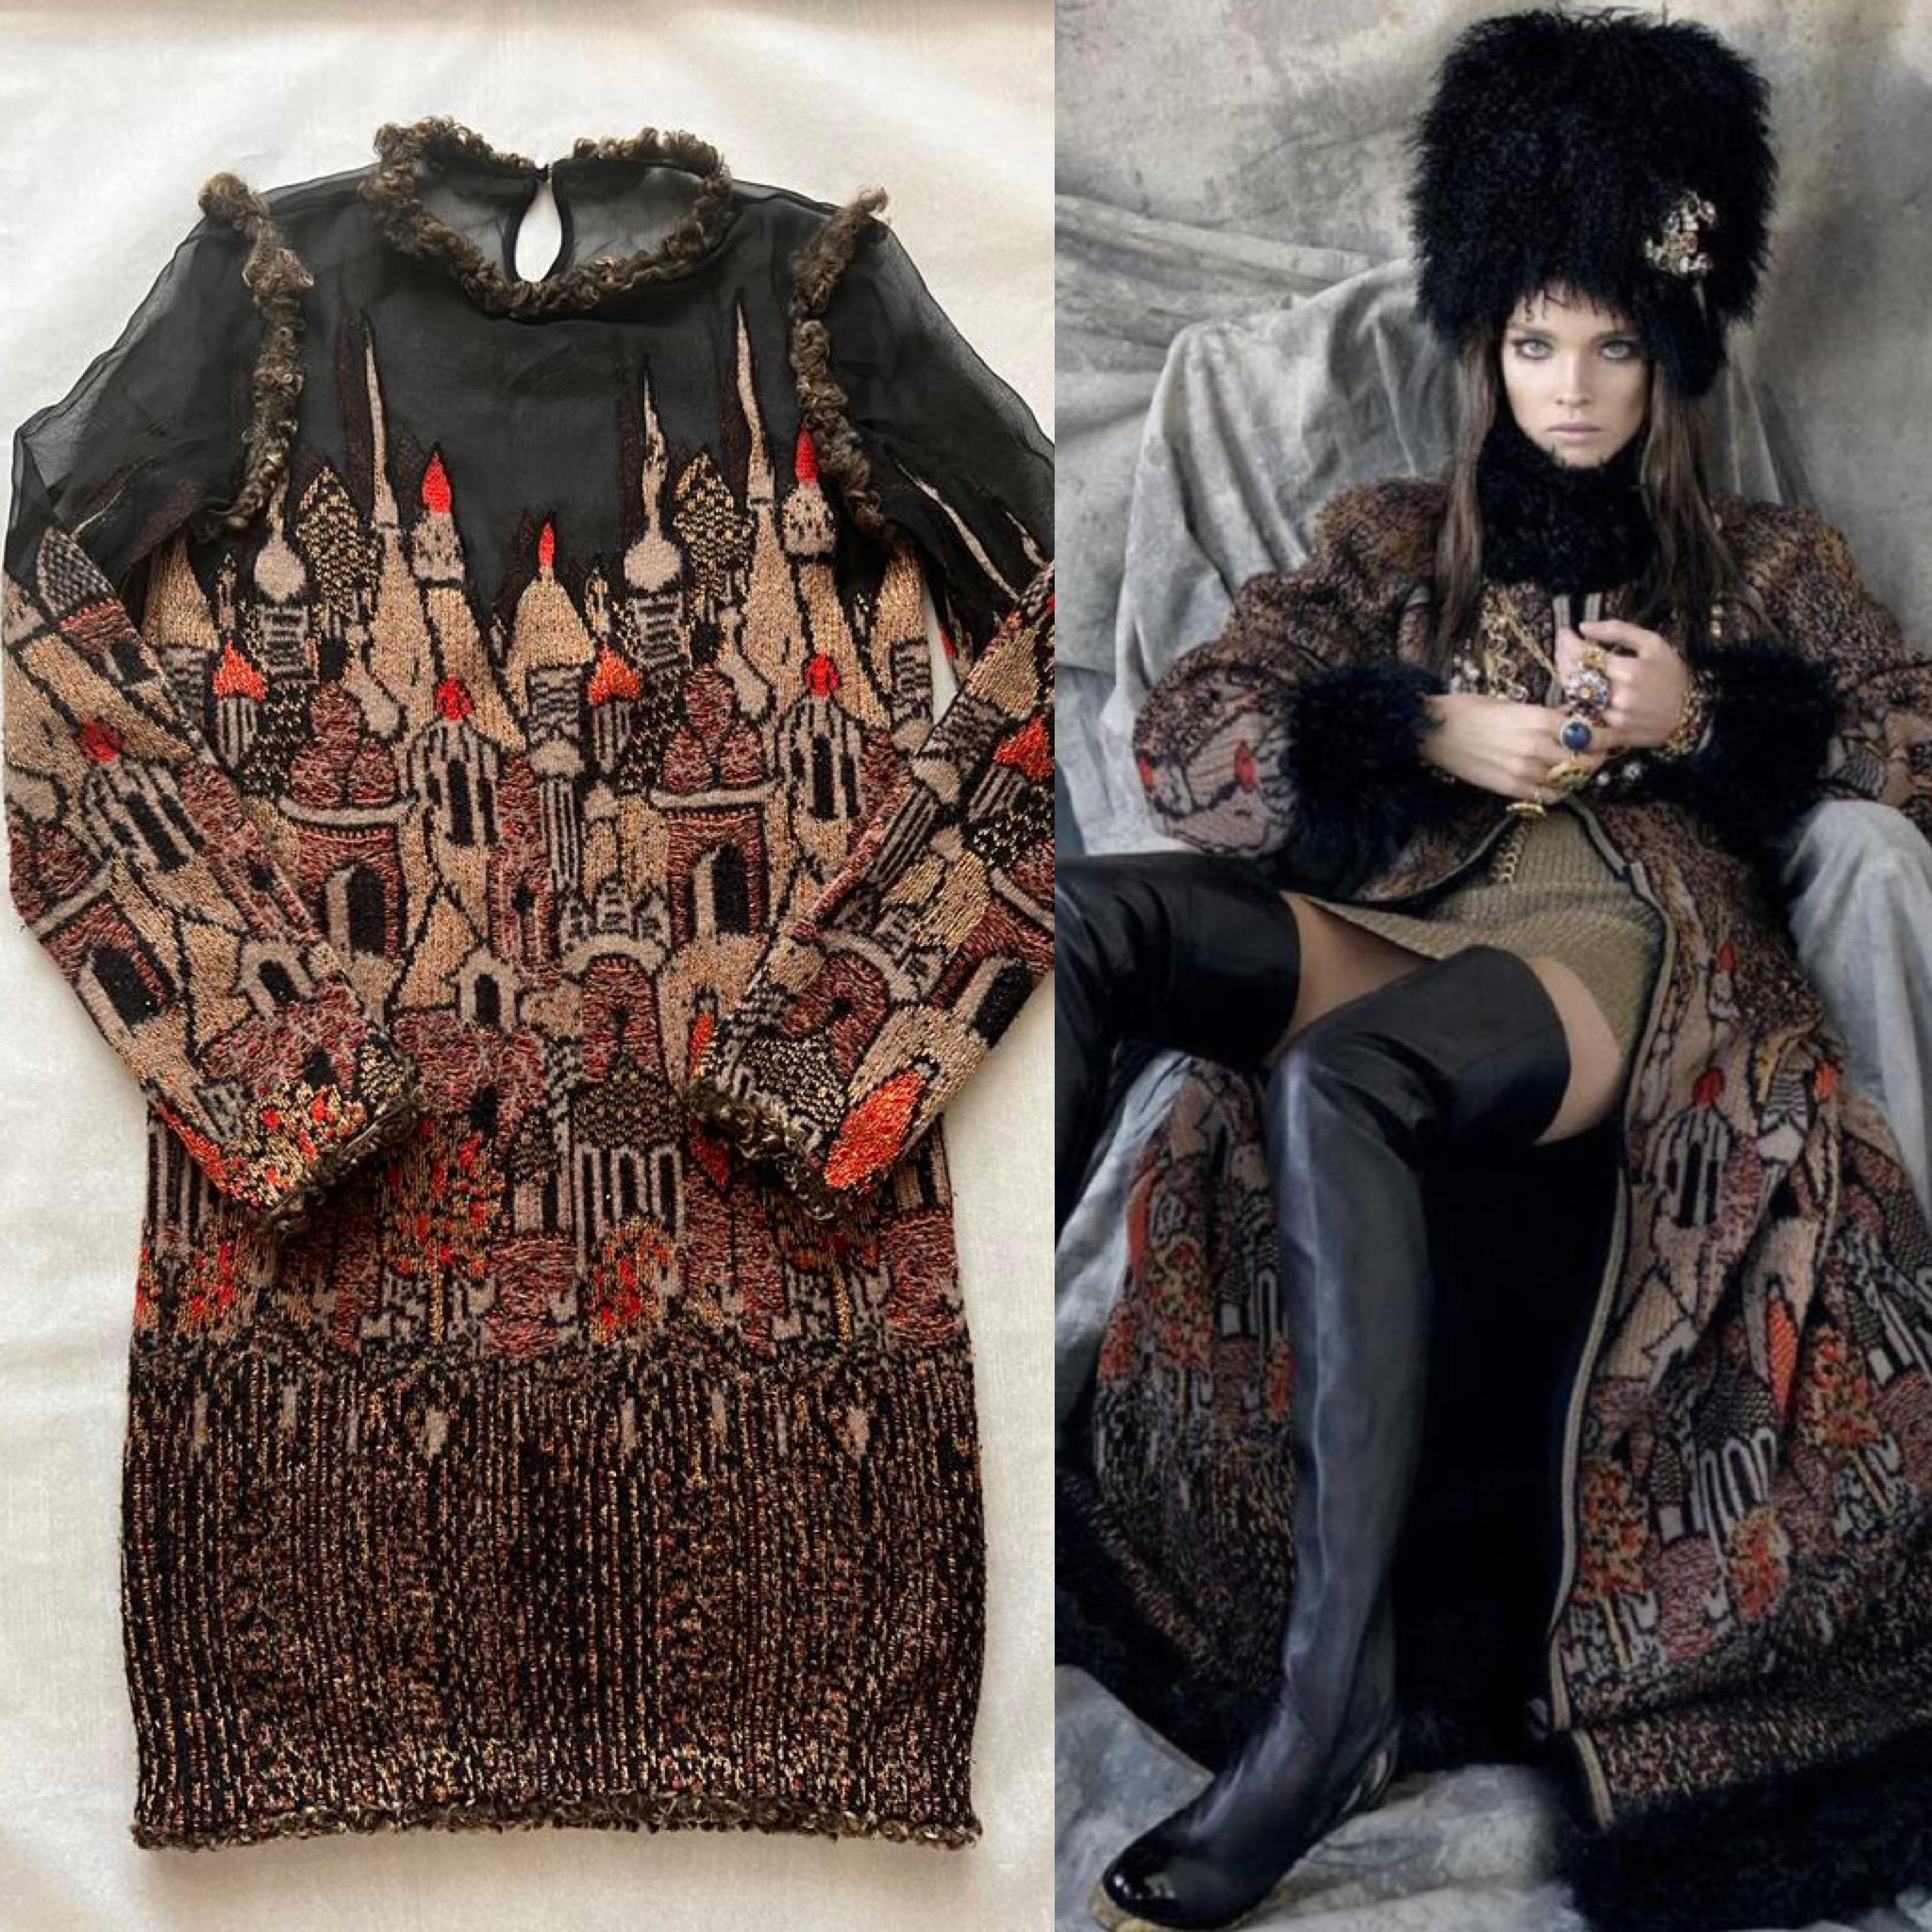 Stunning Chanel dress from Runway of Metiers d'Art Collection 2009, as seen on Supermodel Natalia Vodianova.
Retail price was about 9,000$
- CC logo ' matryoshka ' buttons at back
- sheer black details
Size mark 34 FR, may fit also 36 FR, condition